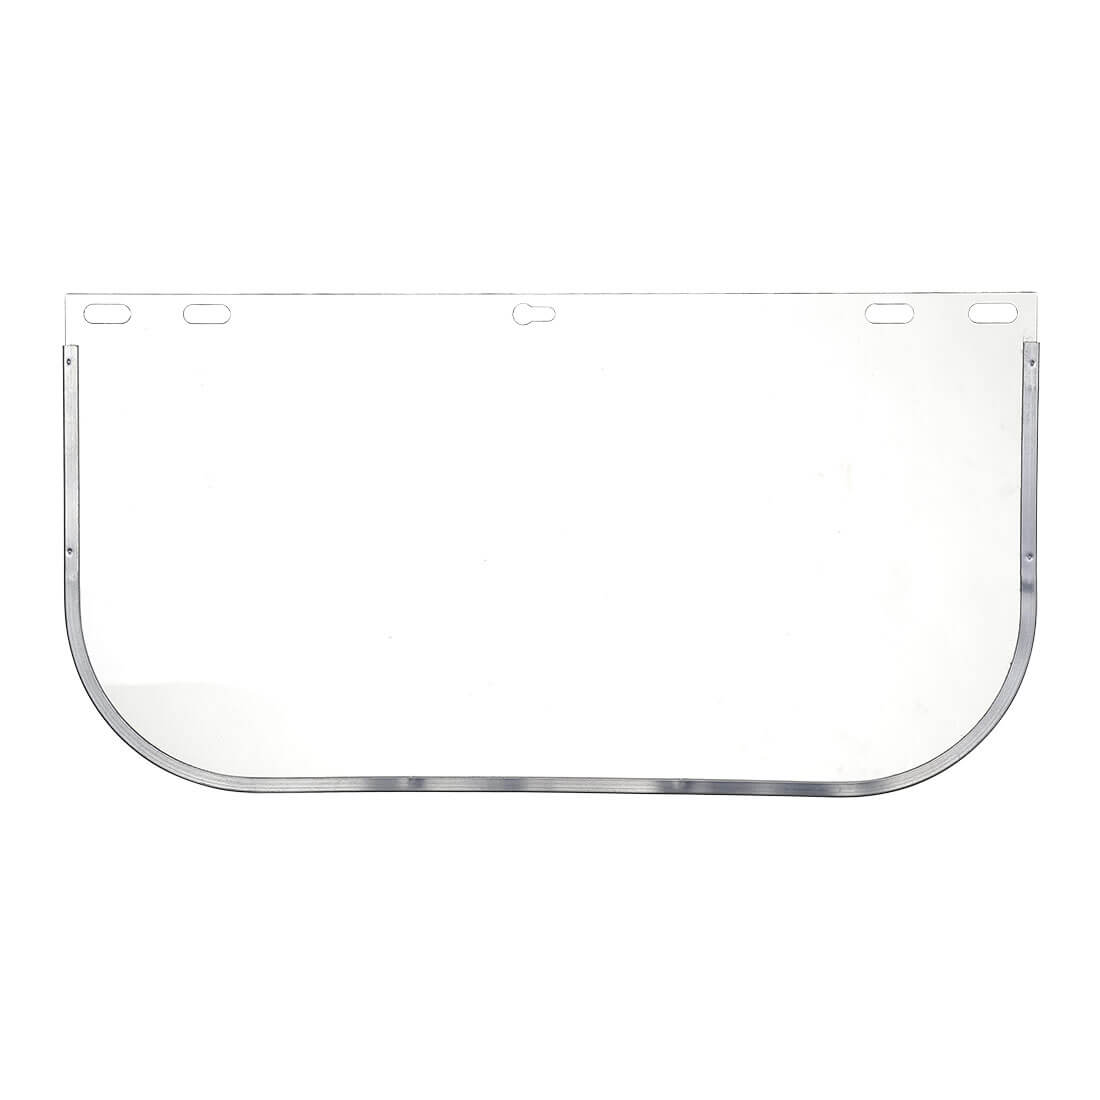 PW99 - Replacement Shield Plus Visor (Pack of 3)